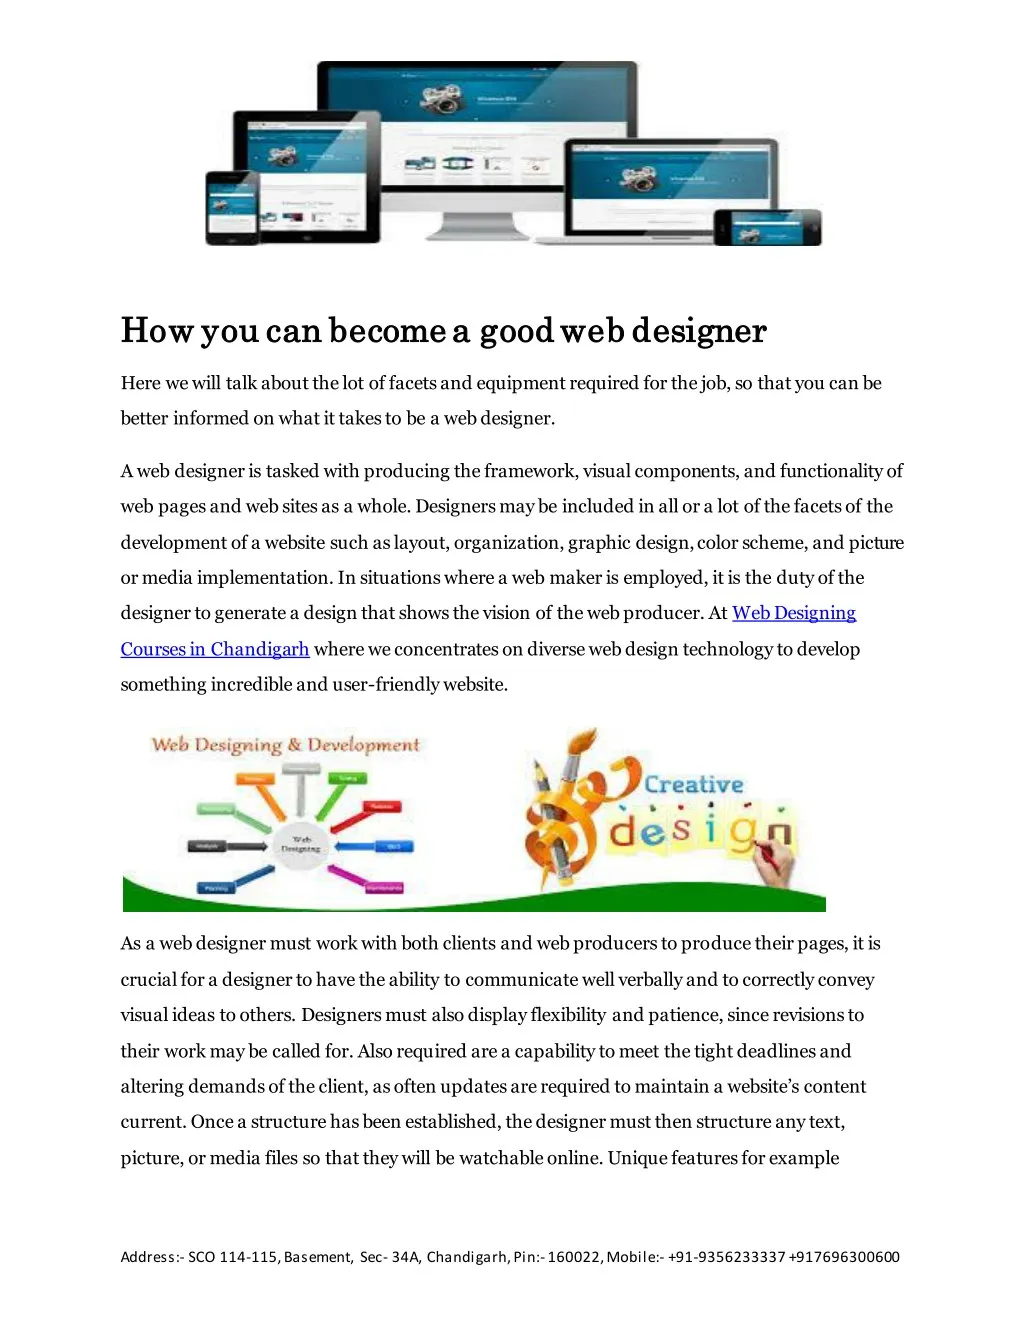 how you can become a good web designer